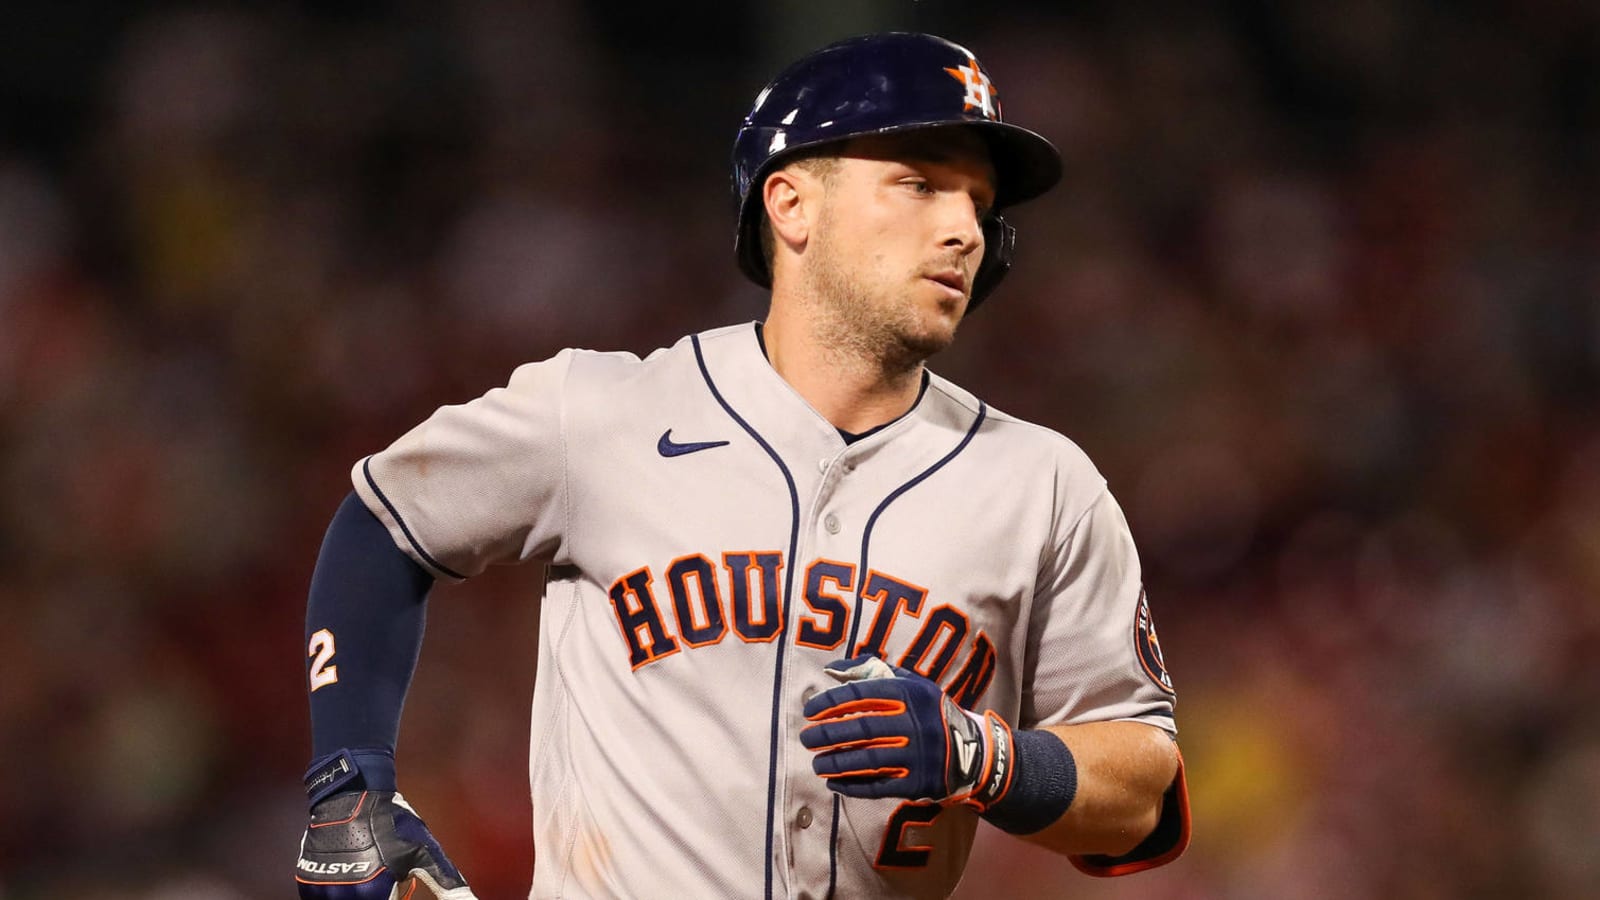 Fan hilariously teases Alex Bregman with fake photo request